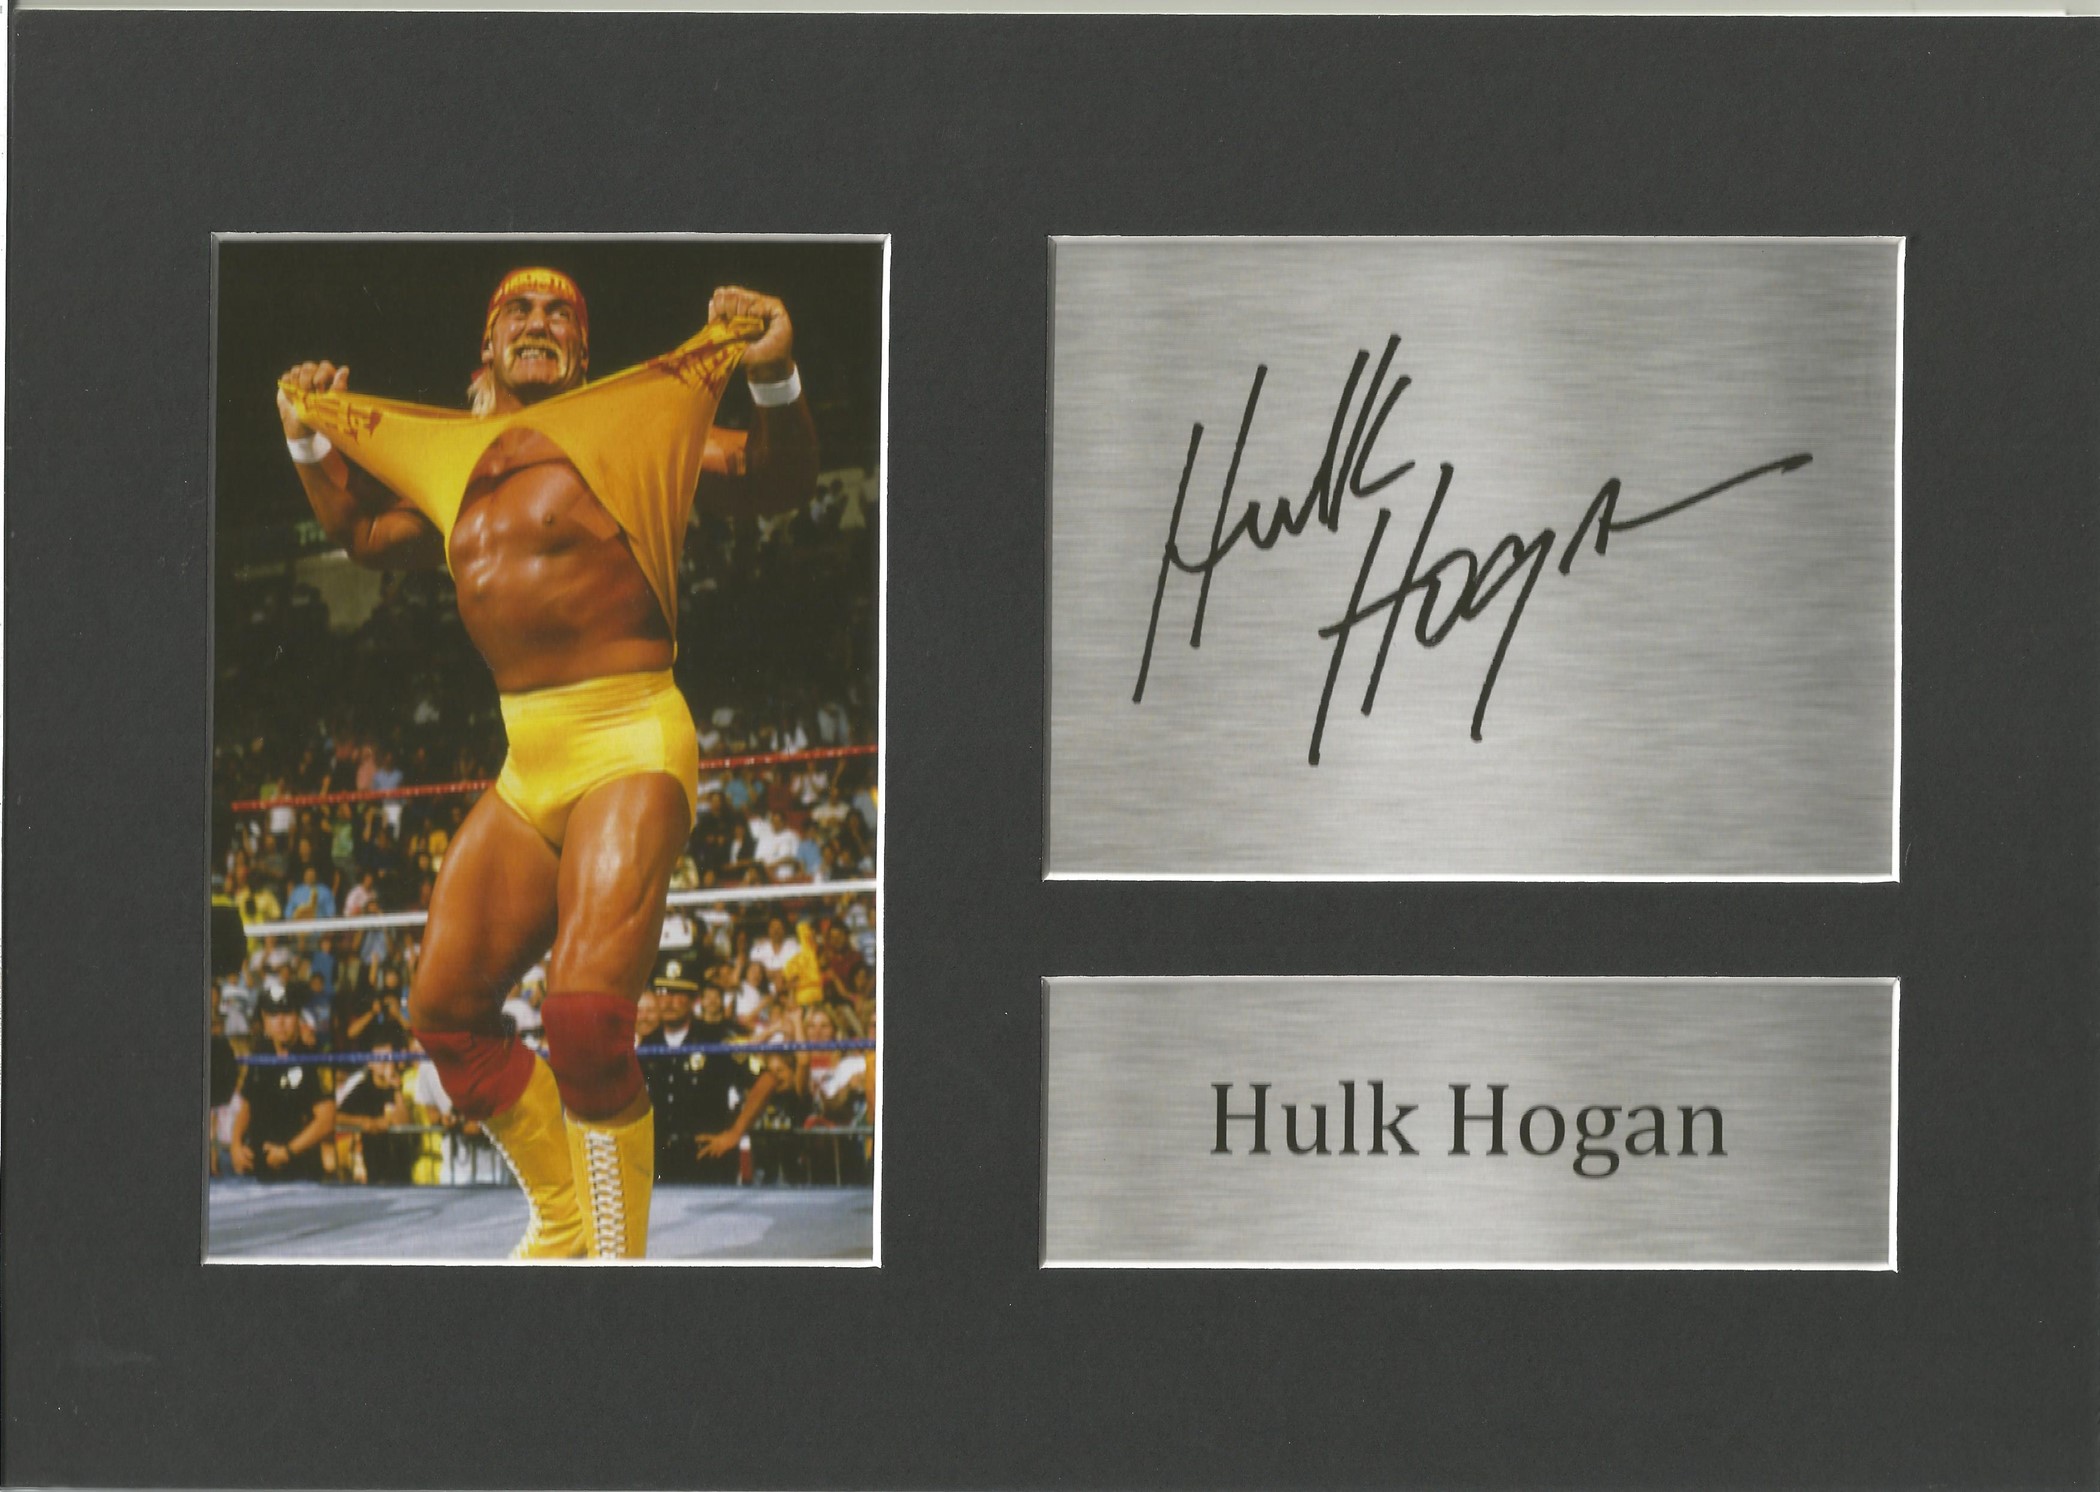 WWE, Hulk Hogan, 11x8 matted printed signature NOT HAND SIGNED piece. This beautifully presented